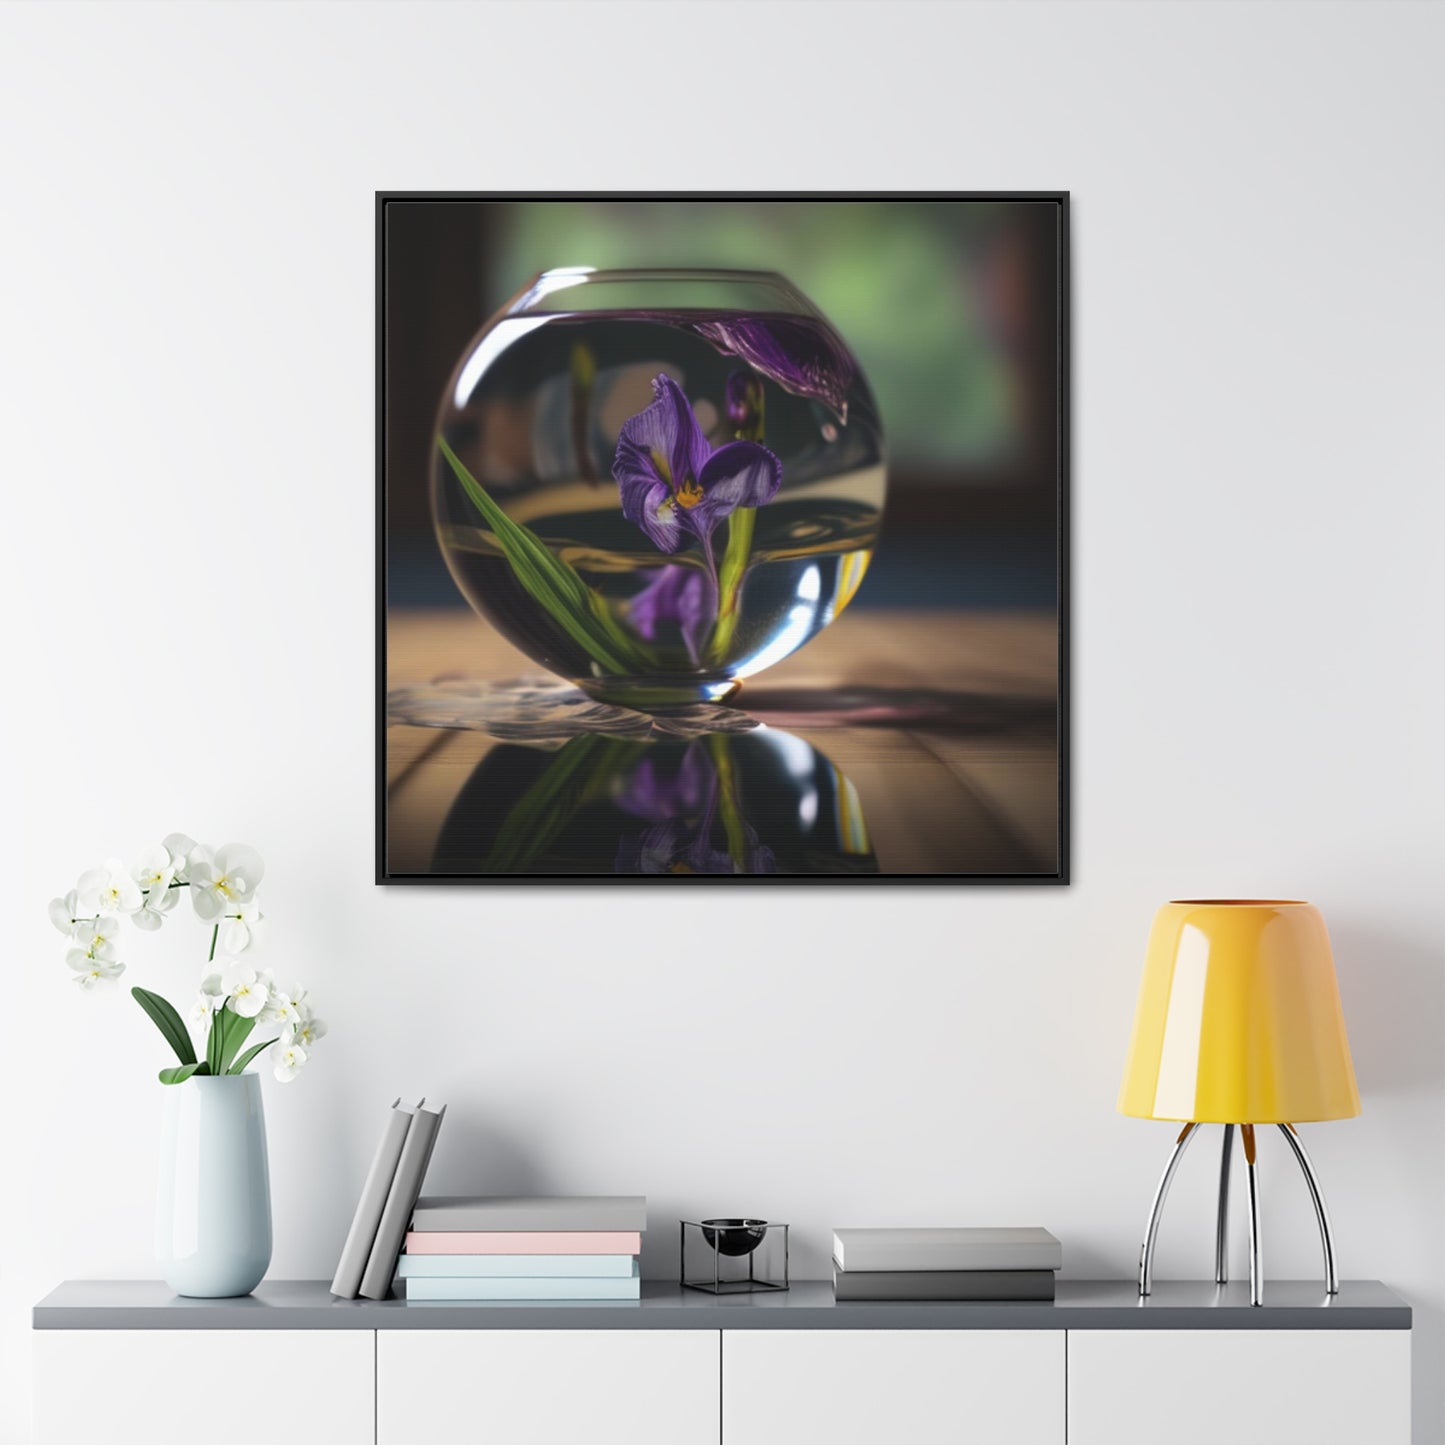 Gallery Canvas Wraps, Square Frame Purple Iris in a vase 1